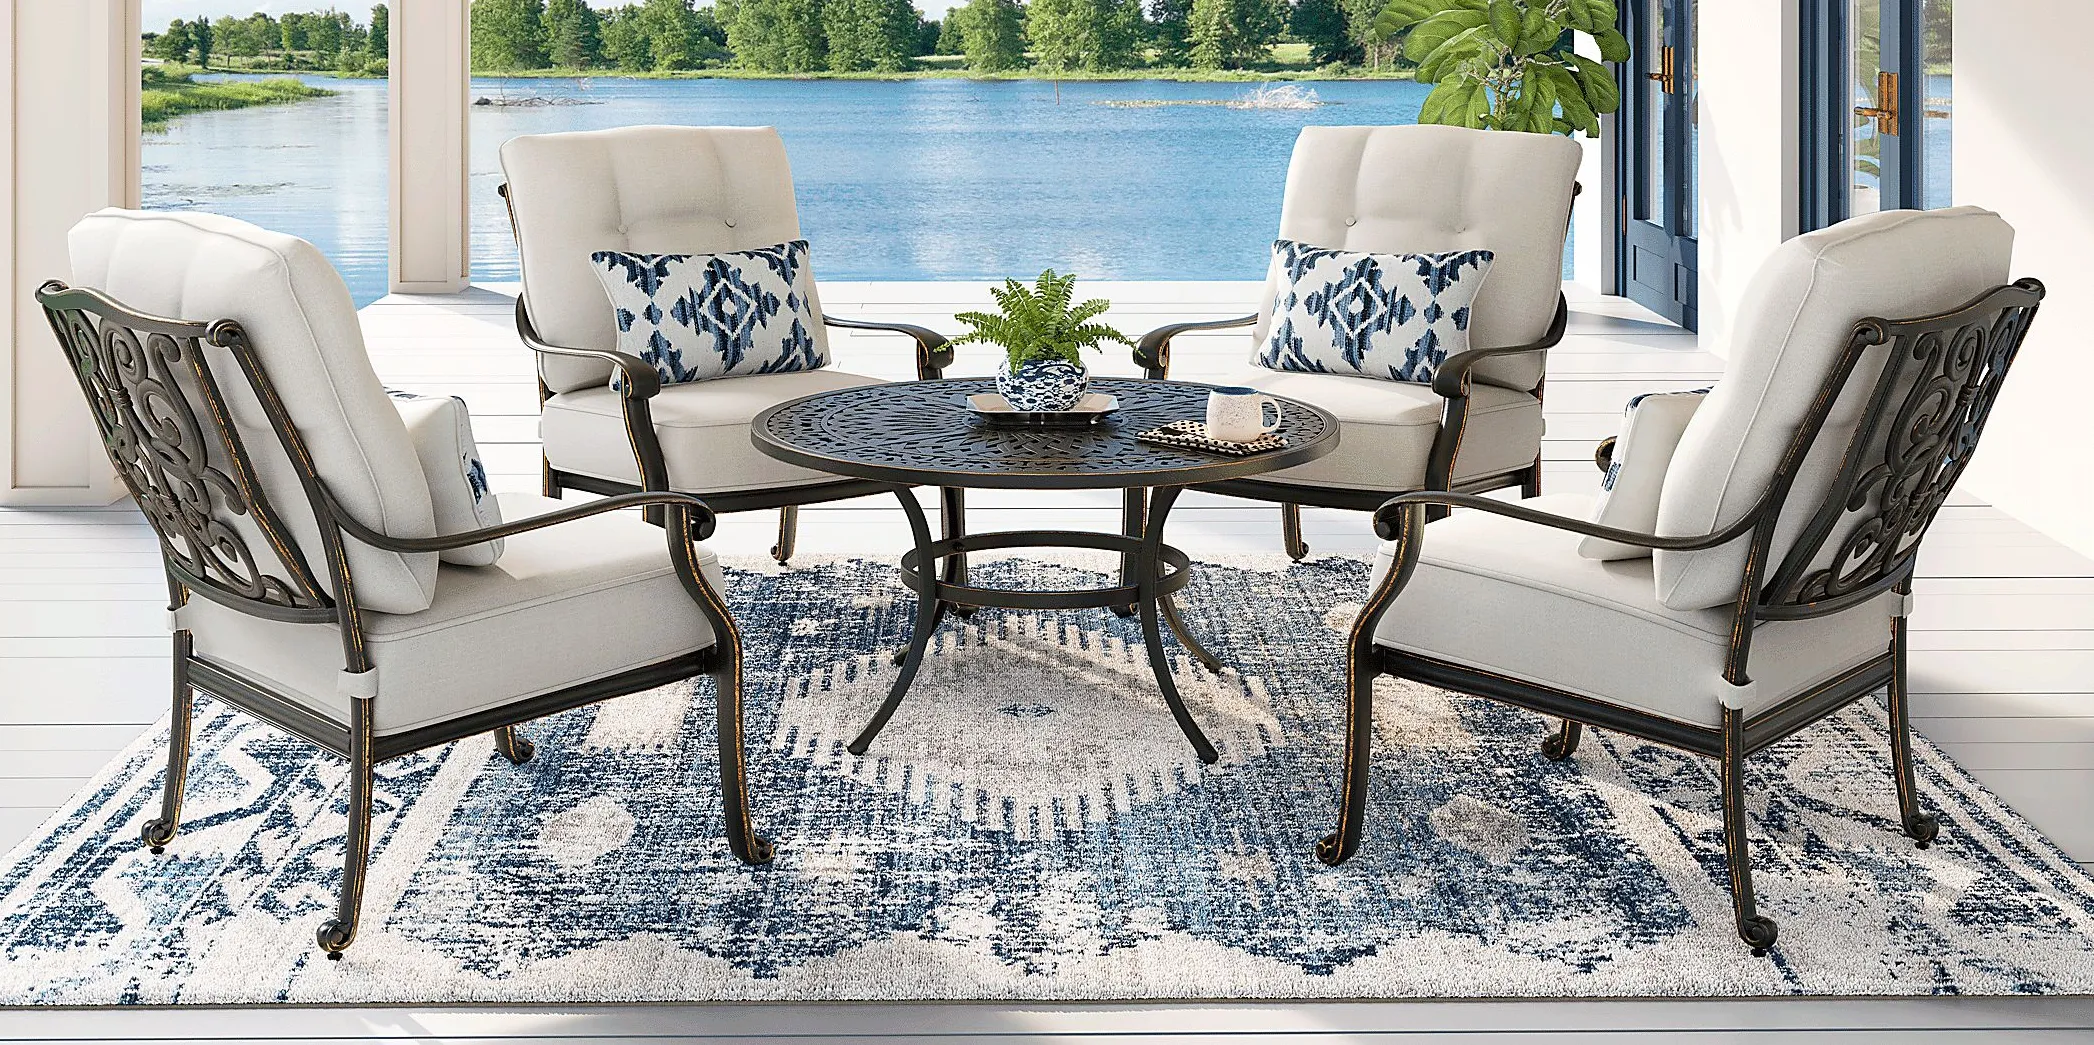 Lake Como Antique Bronze 5 Pc Outdoor Chat Set with Coconut Cushions